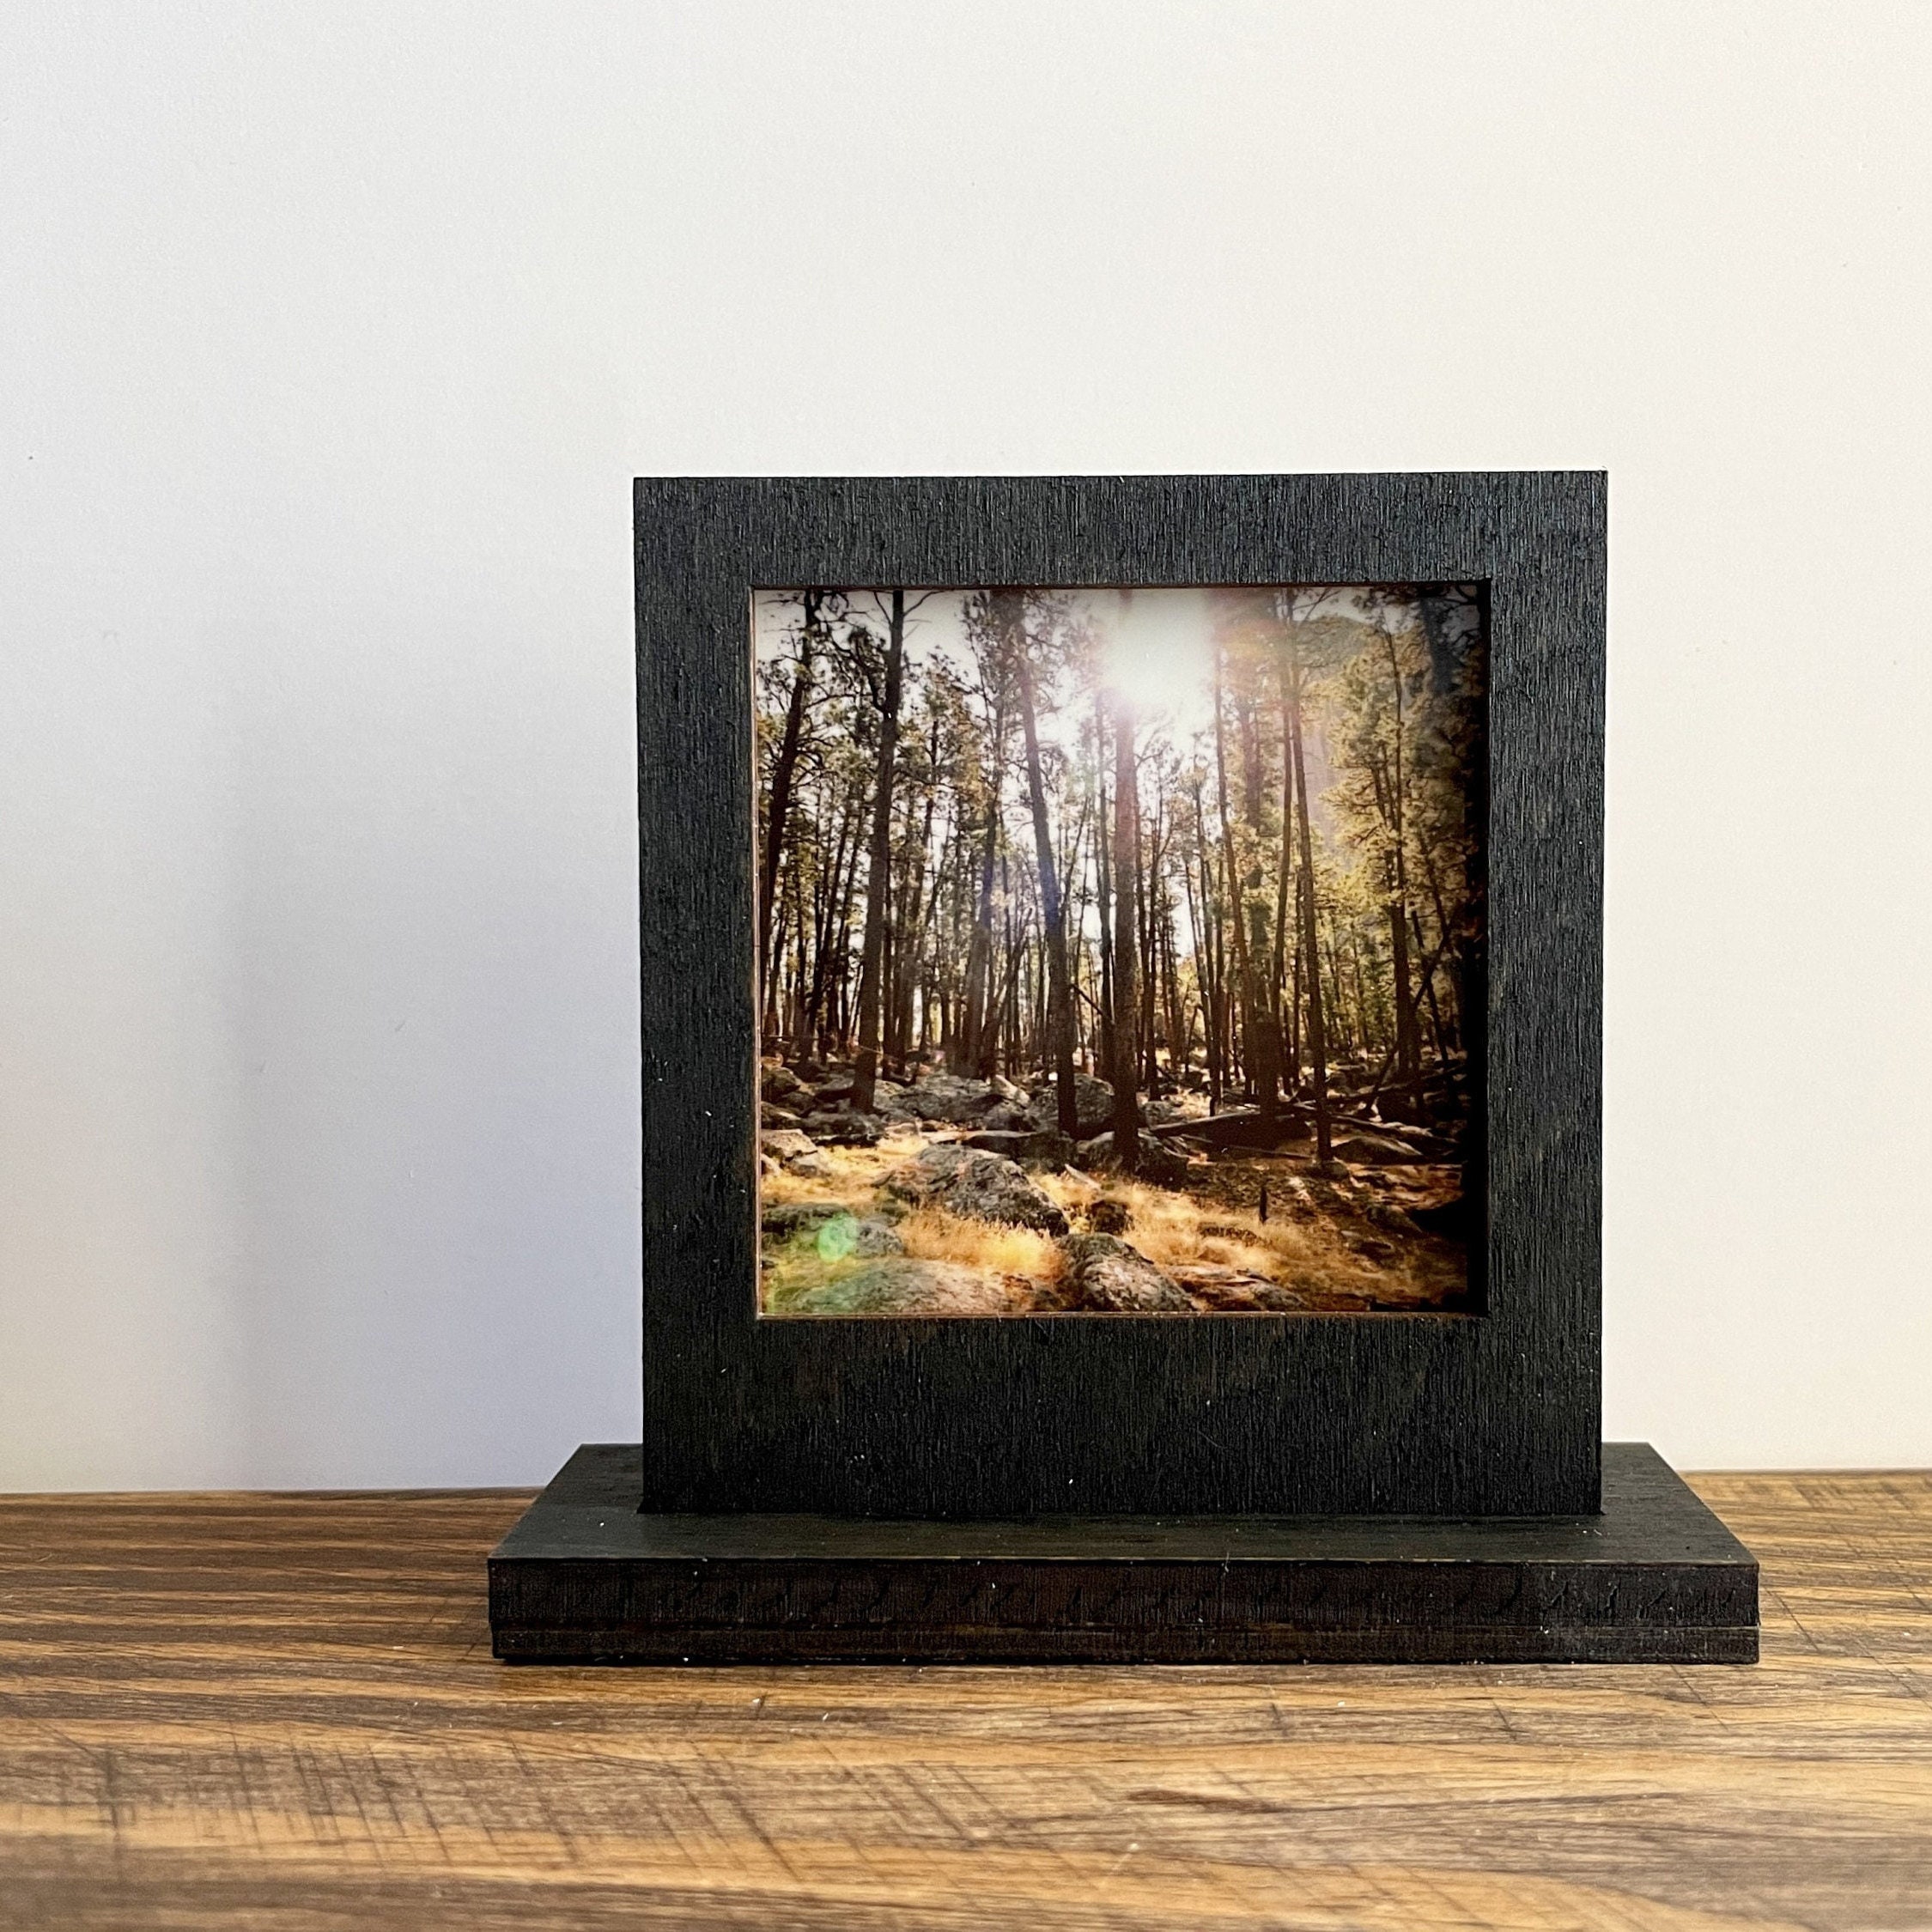 11x11 Floating Picture Frame/Shadow Box Frame with Clip for 4x4